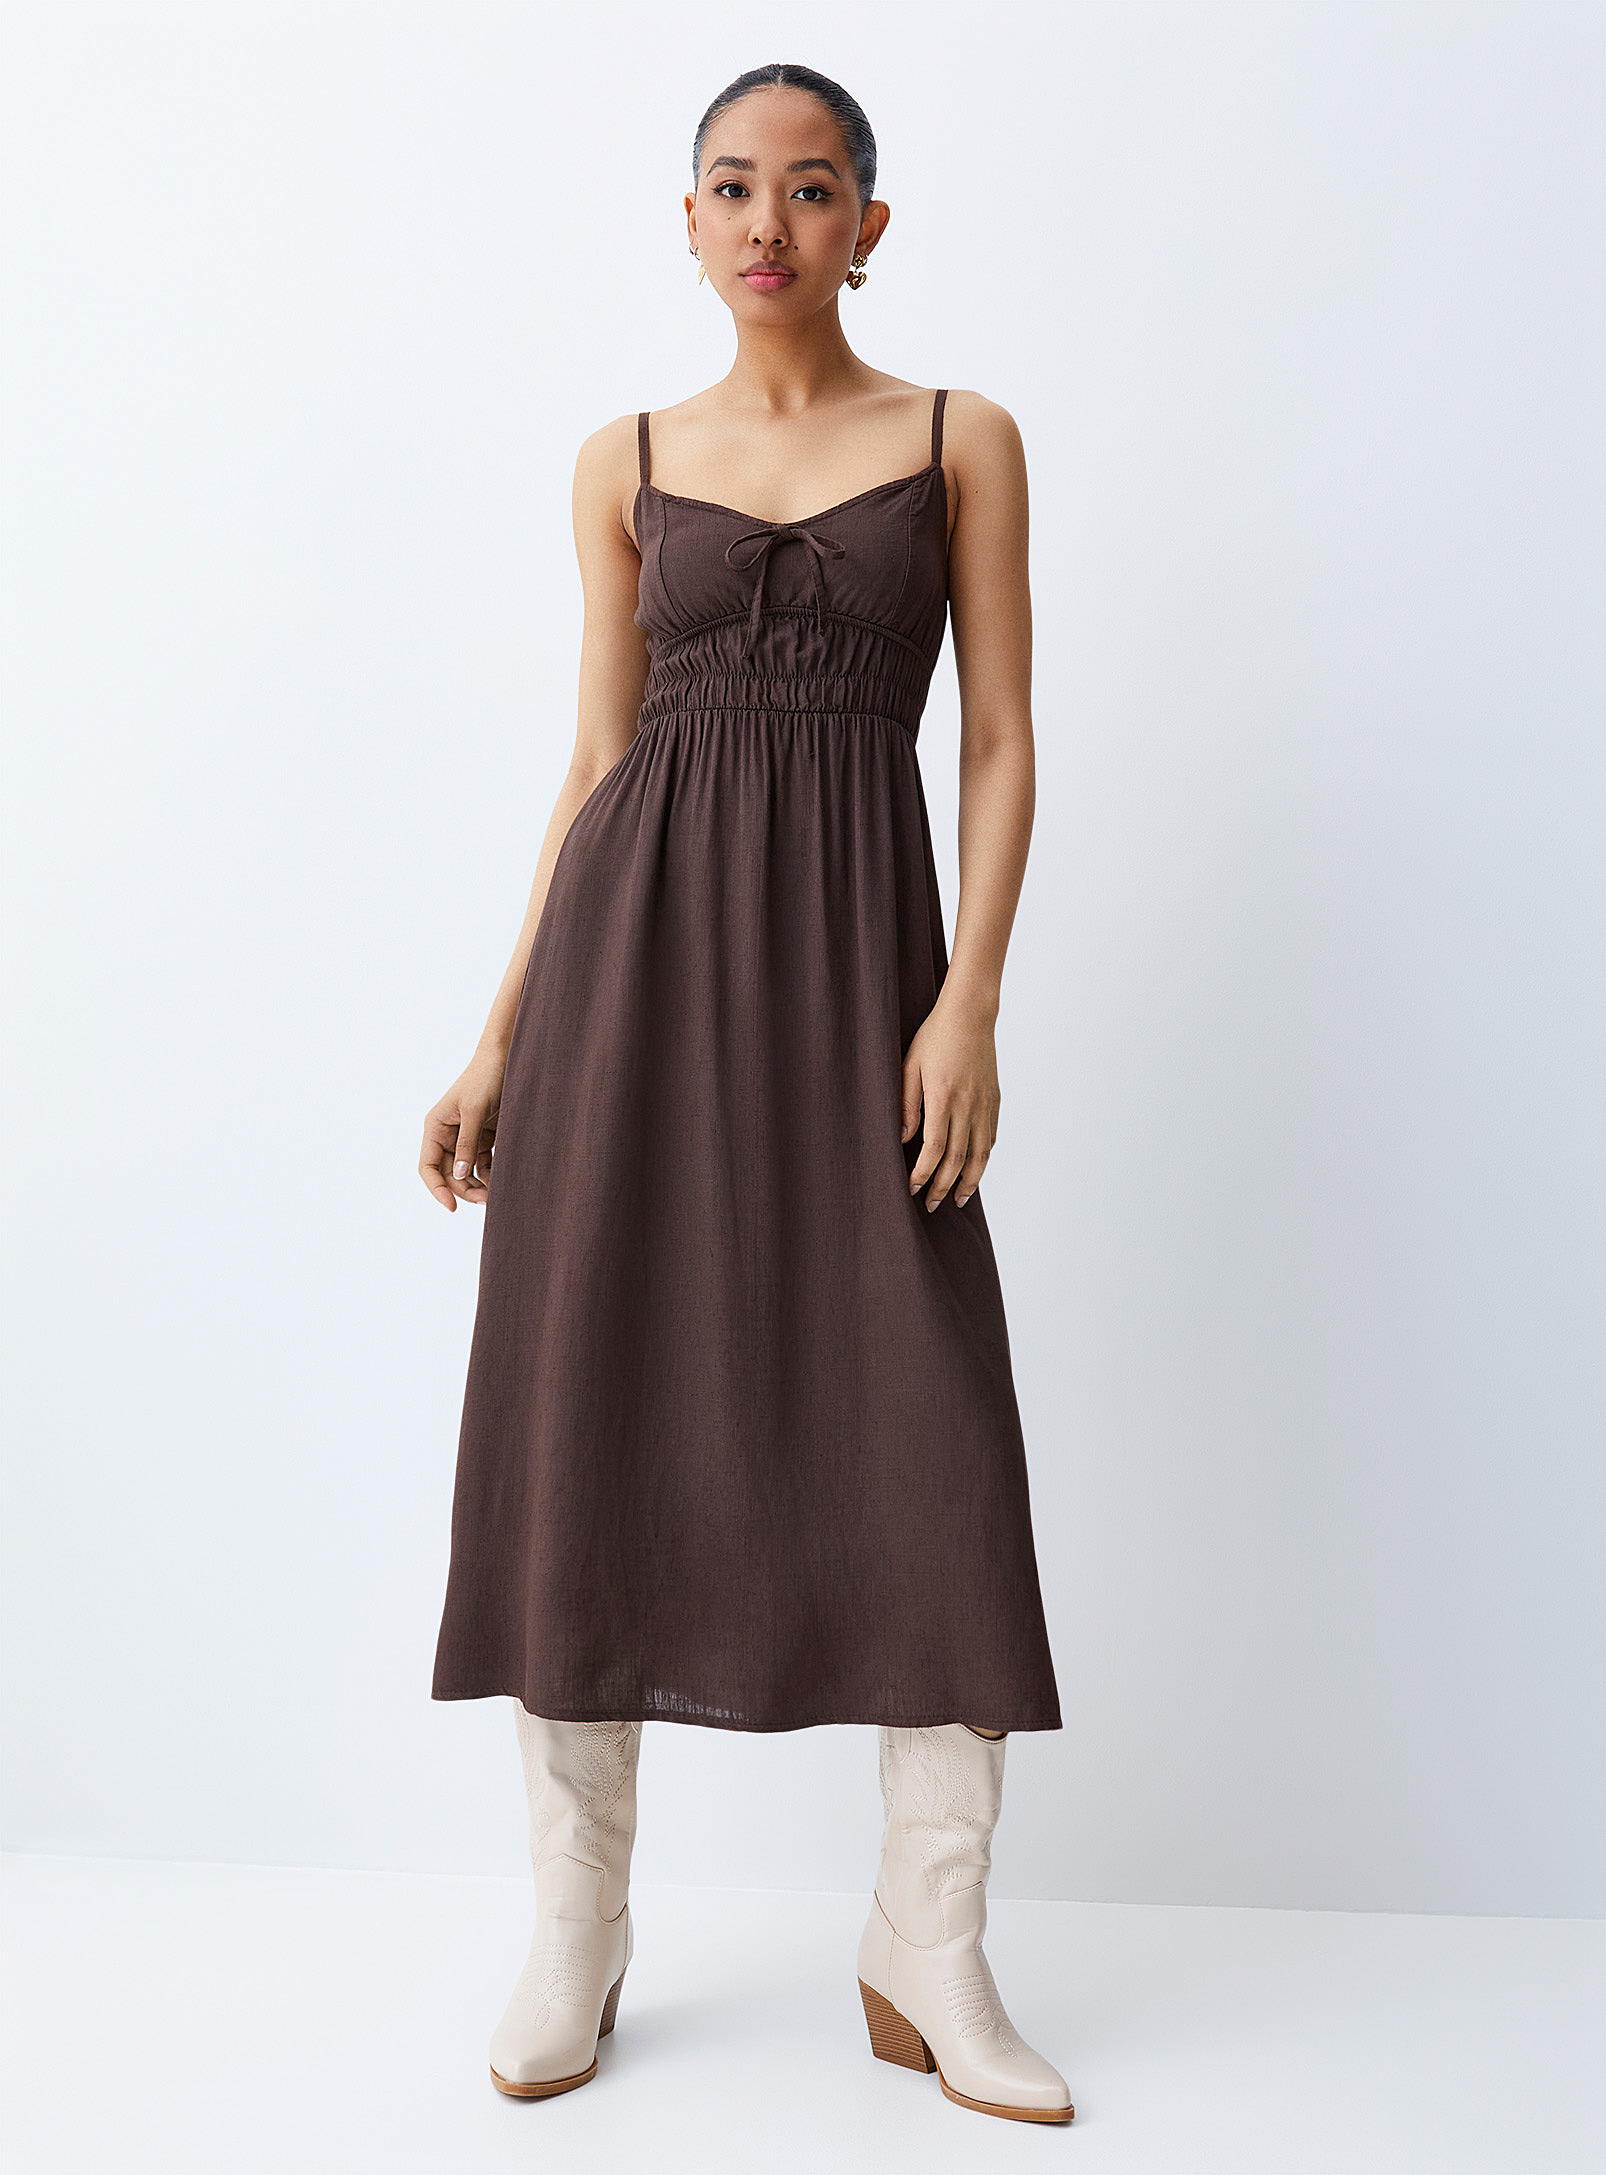 Twik Honeycomb Dress Touches Flax In Chocolate/espresso